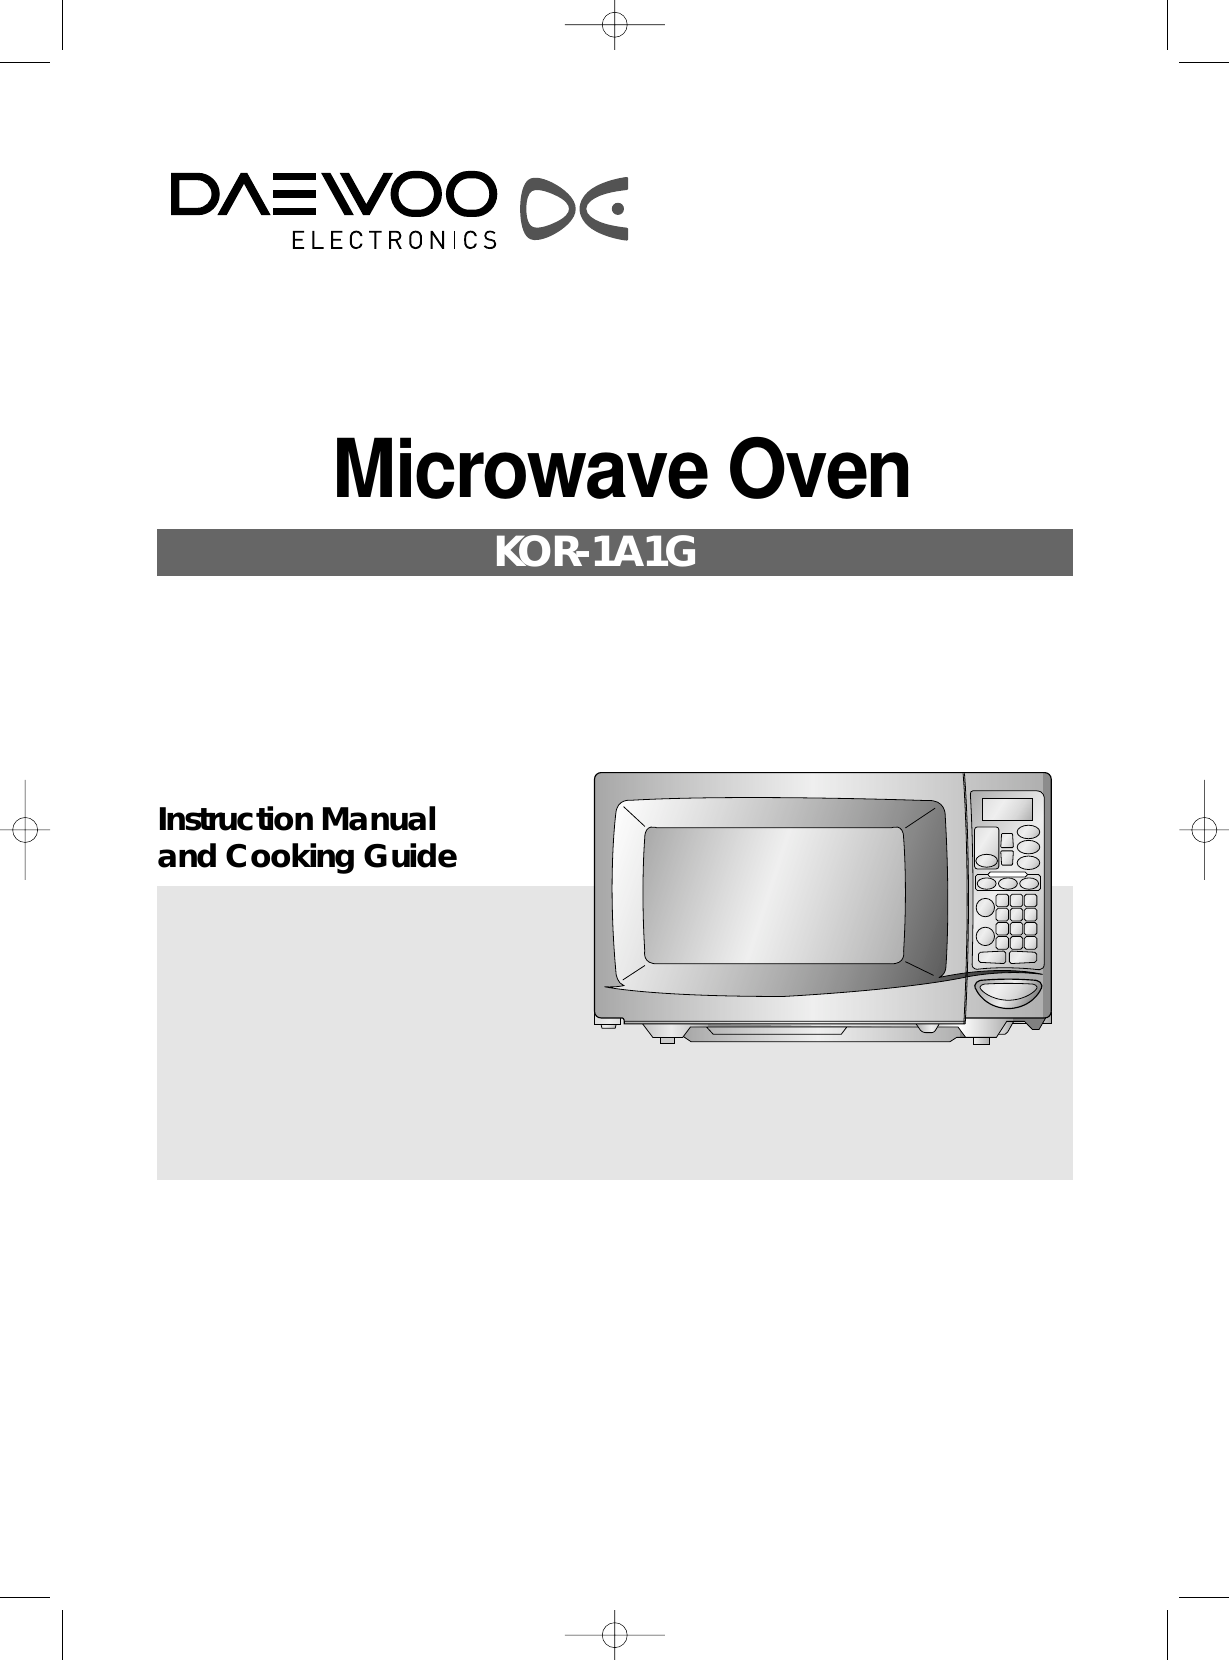 Instruction Manualand Cooking Guide         Microwave Oven           KOR-1A1G 